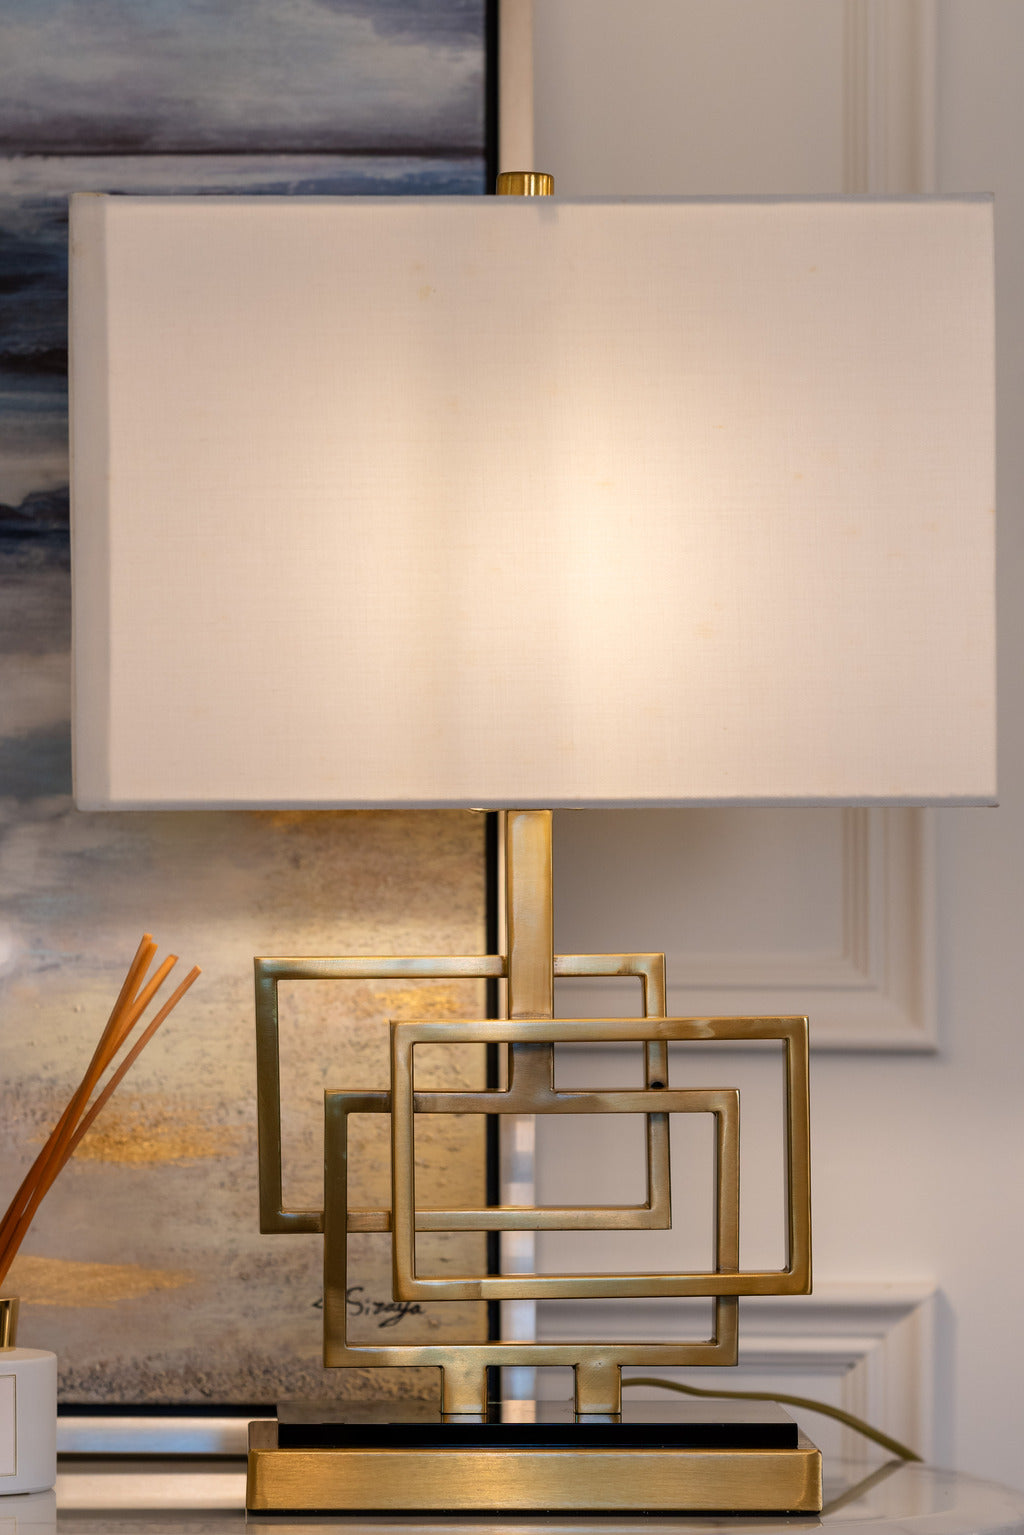 Statement lamps, gold lamp, abstract lamps, lighting, Gold furniture, interior design, Decor